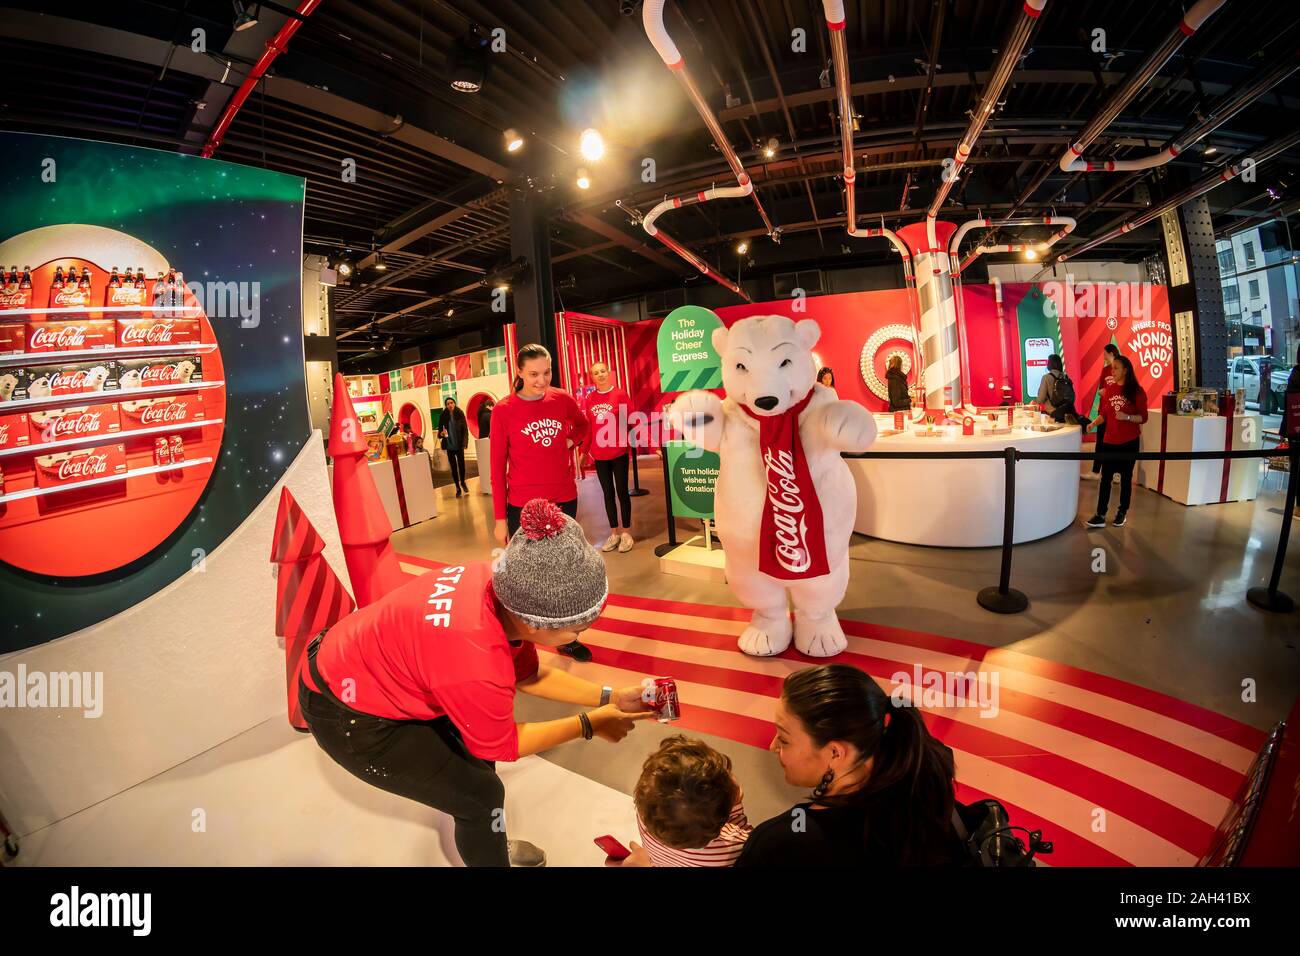 A brand ambassador wears a polar bear costume at the Coca-Cola brand activation at the Target "Wonderland!" pop-up store in the Meatpacking District in New York on its grand opening day, Friday, December 13, 2019. The pop-up, featuring numerous instagrammable moments as well as product experiences, is open until December 22. (© Richard B. Levine) Stock Photo